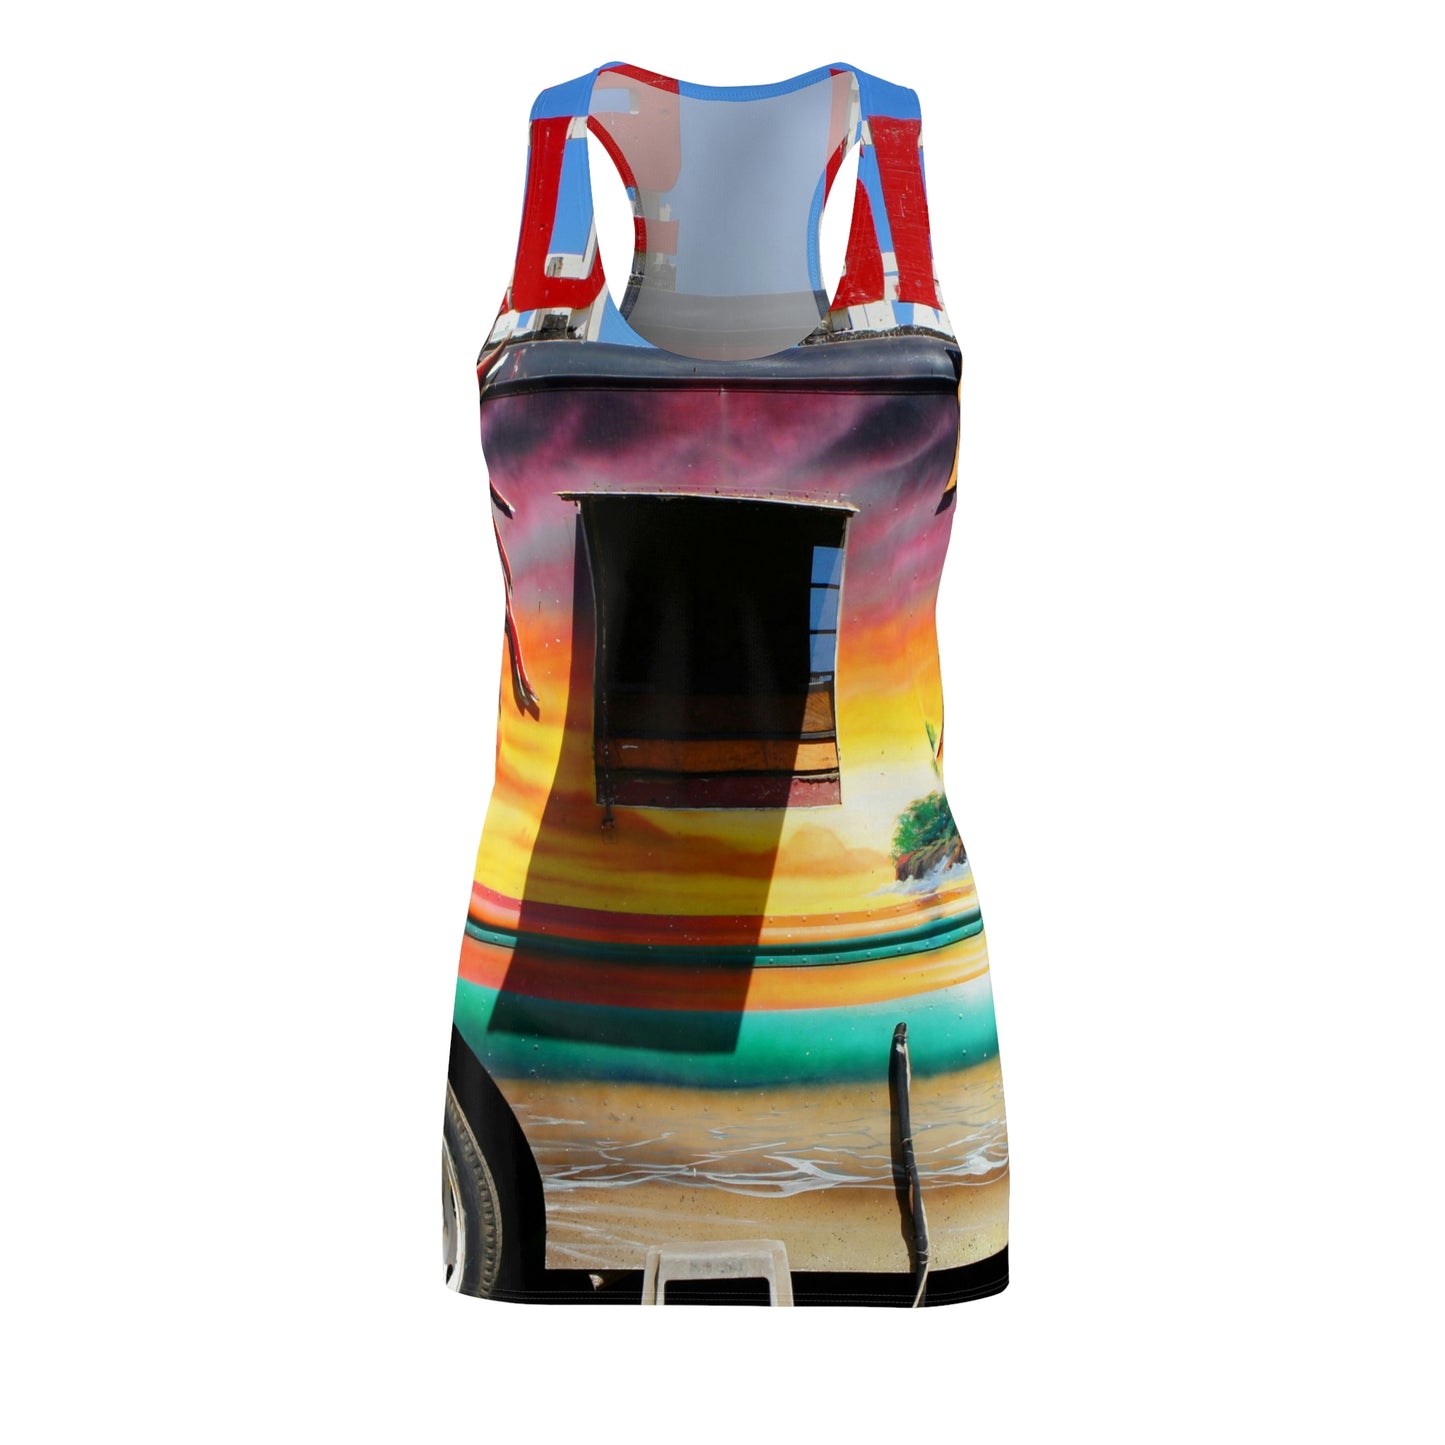 Island Love - Women's All-Over Print Racerback Dress - Fry1Productions